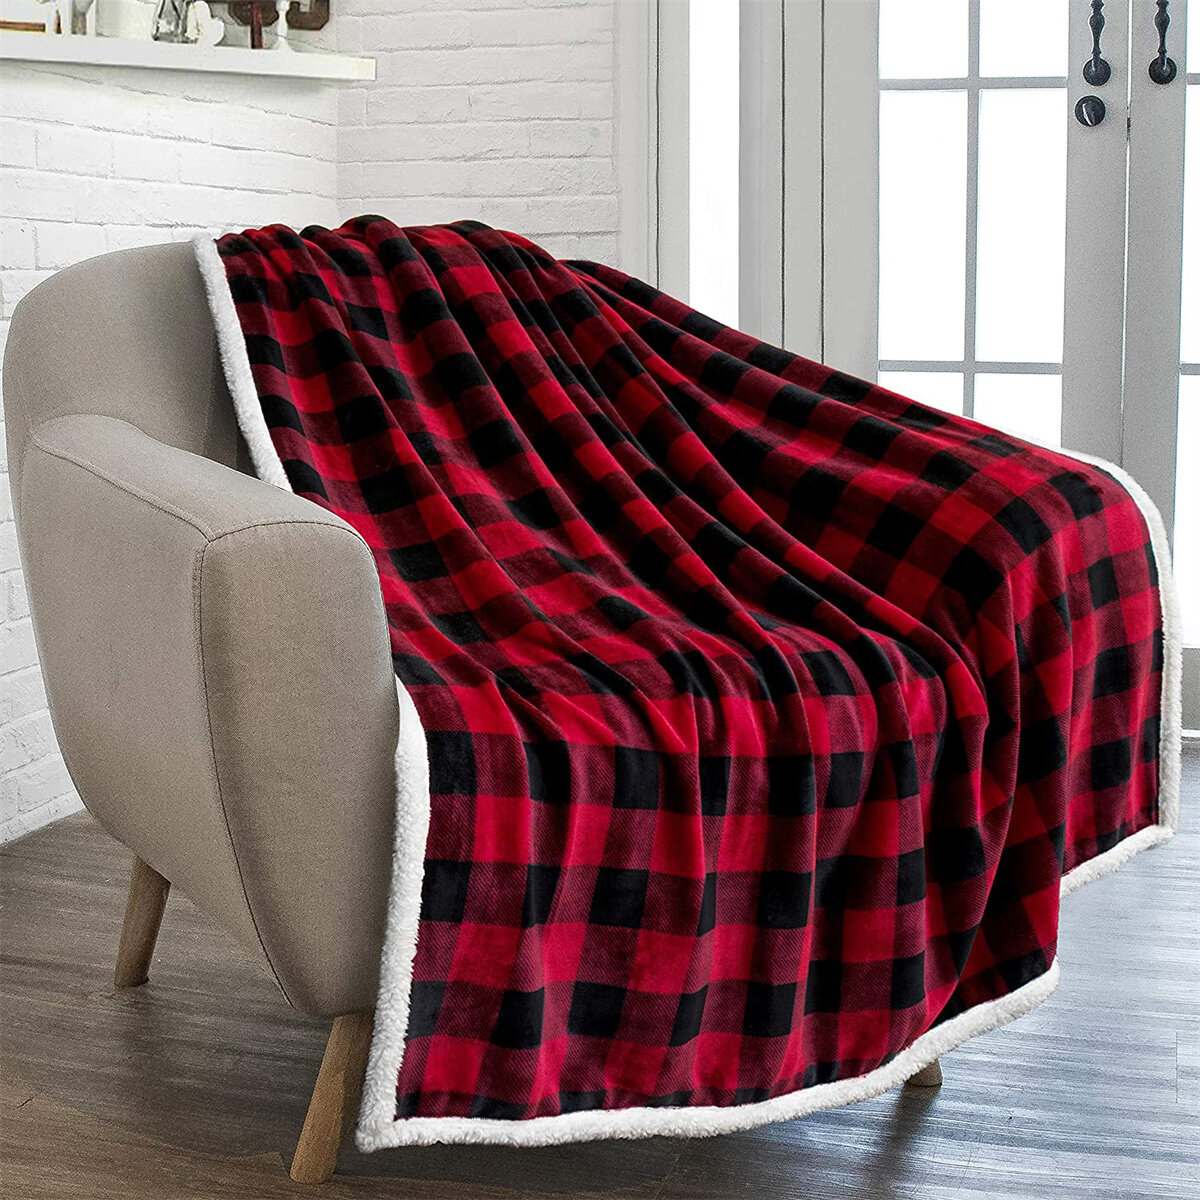 Image Curtain Bedding Blanket Throw Blankets for Keep Warm Everyday Use Blanket Reversible Microfiber Blanket 40x50 inch Plush Fluffy Blanket Flannel Geometric Abstract Pattern Red 